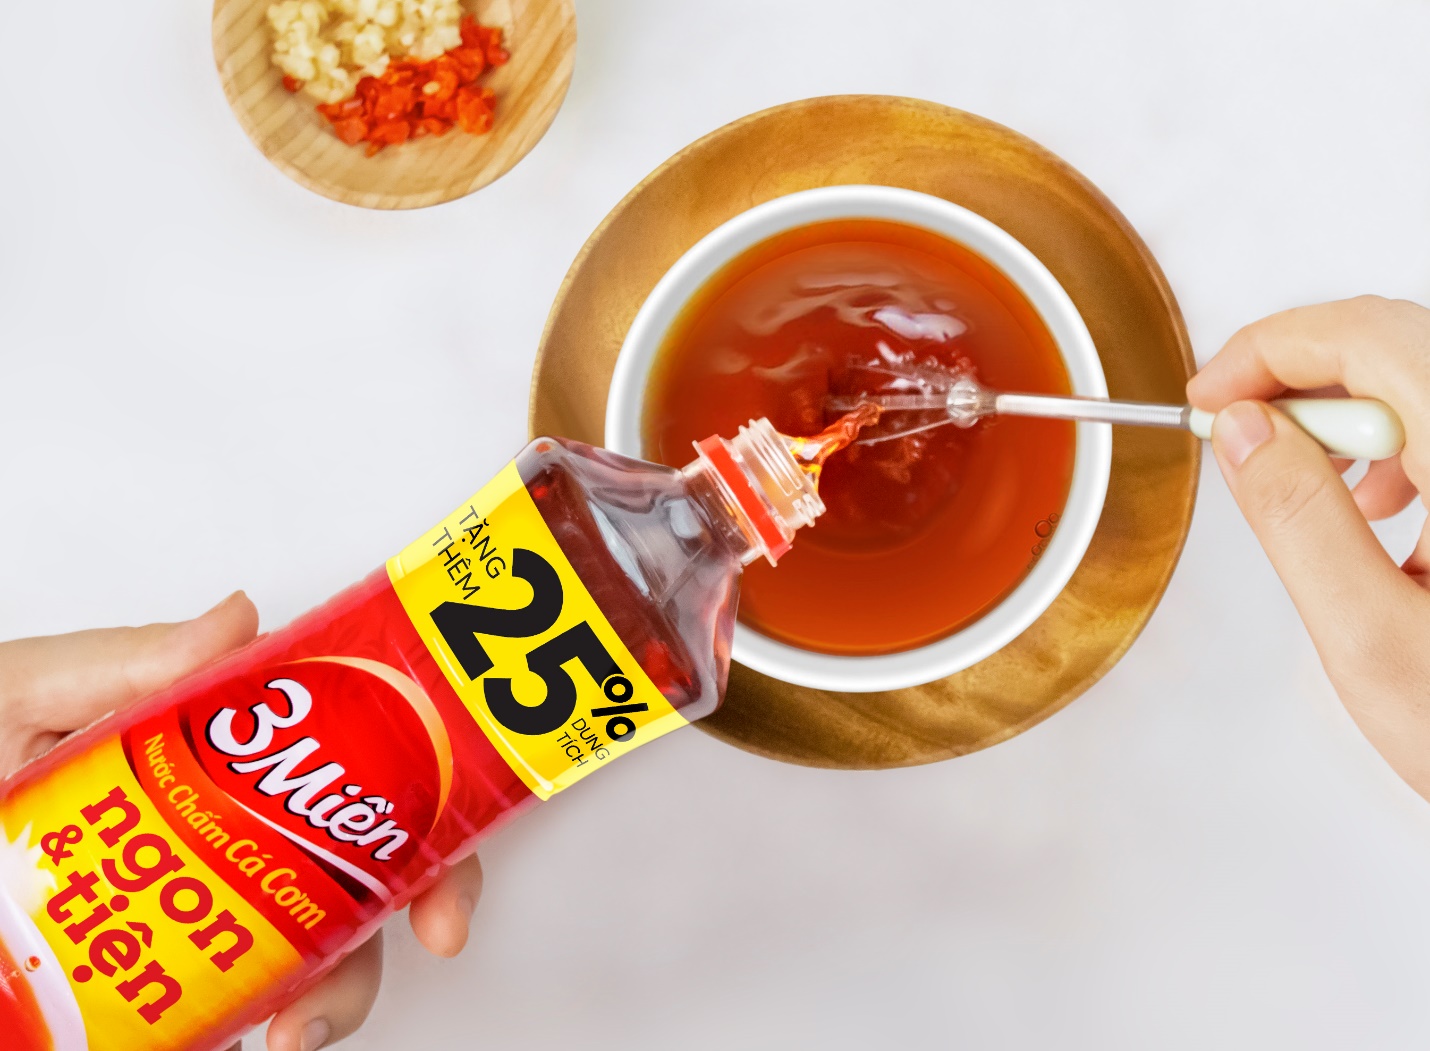 Giving away 25% more capacity, 3 Mien anchovy sauce is delicious and convenient to help you cook many dishes - 3